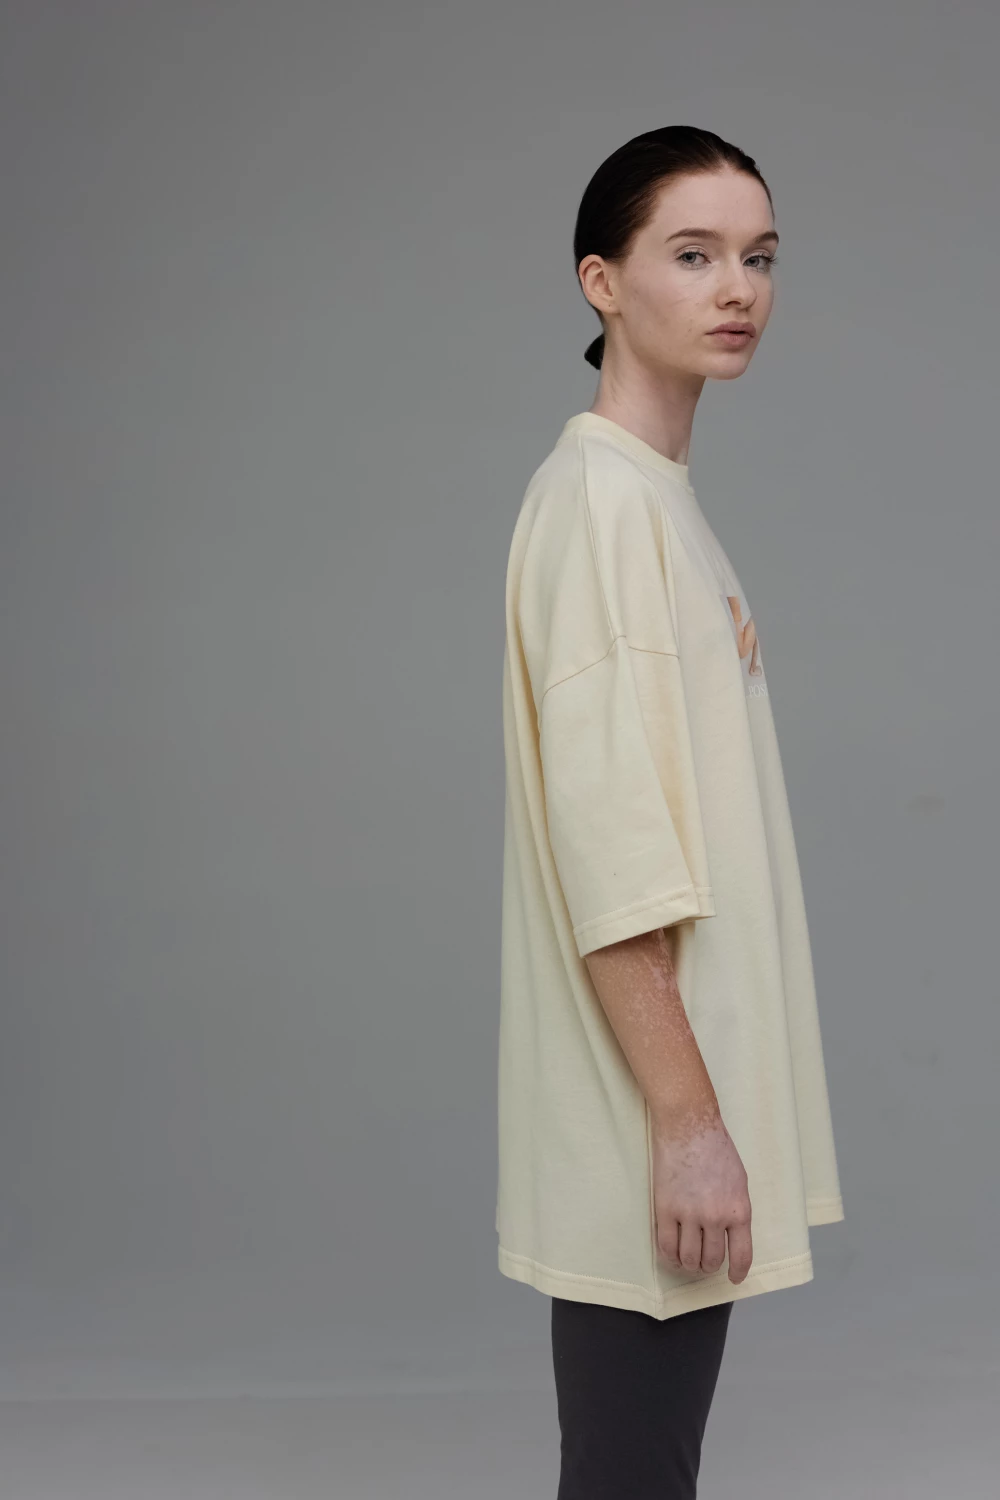 t-shirt under pose in vanilla color